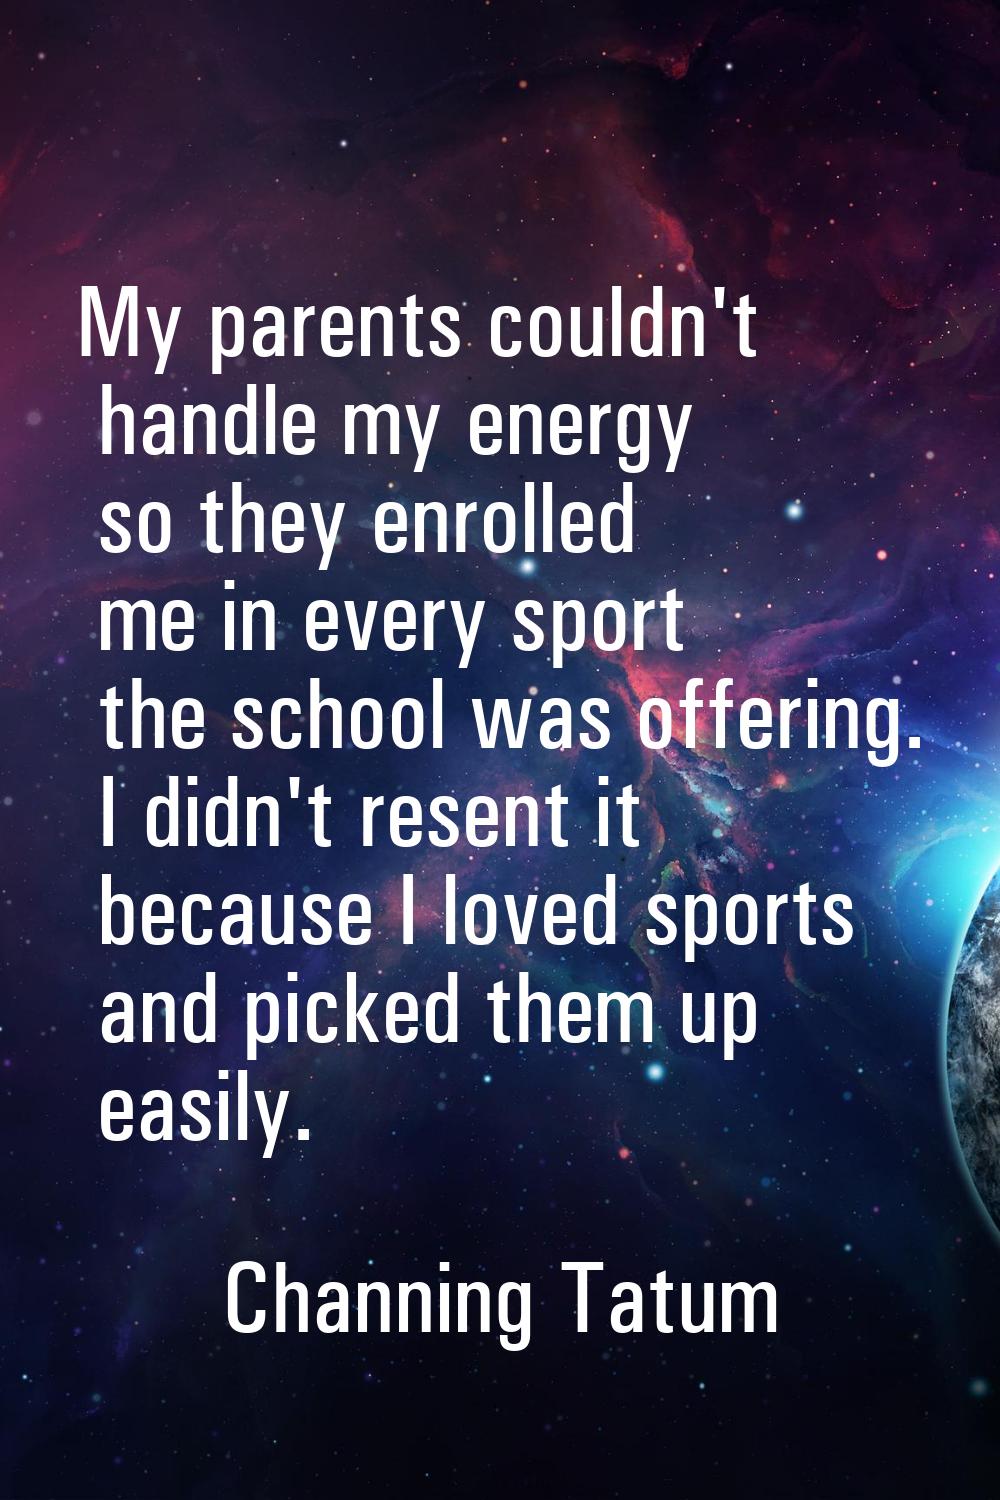 My parents couldn't handle my energy so they enrolled me in every sport the school was offering. I 